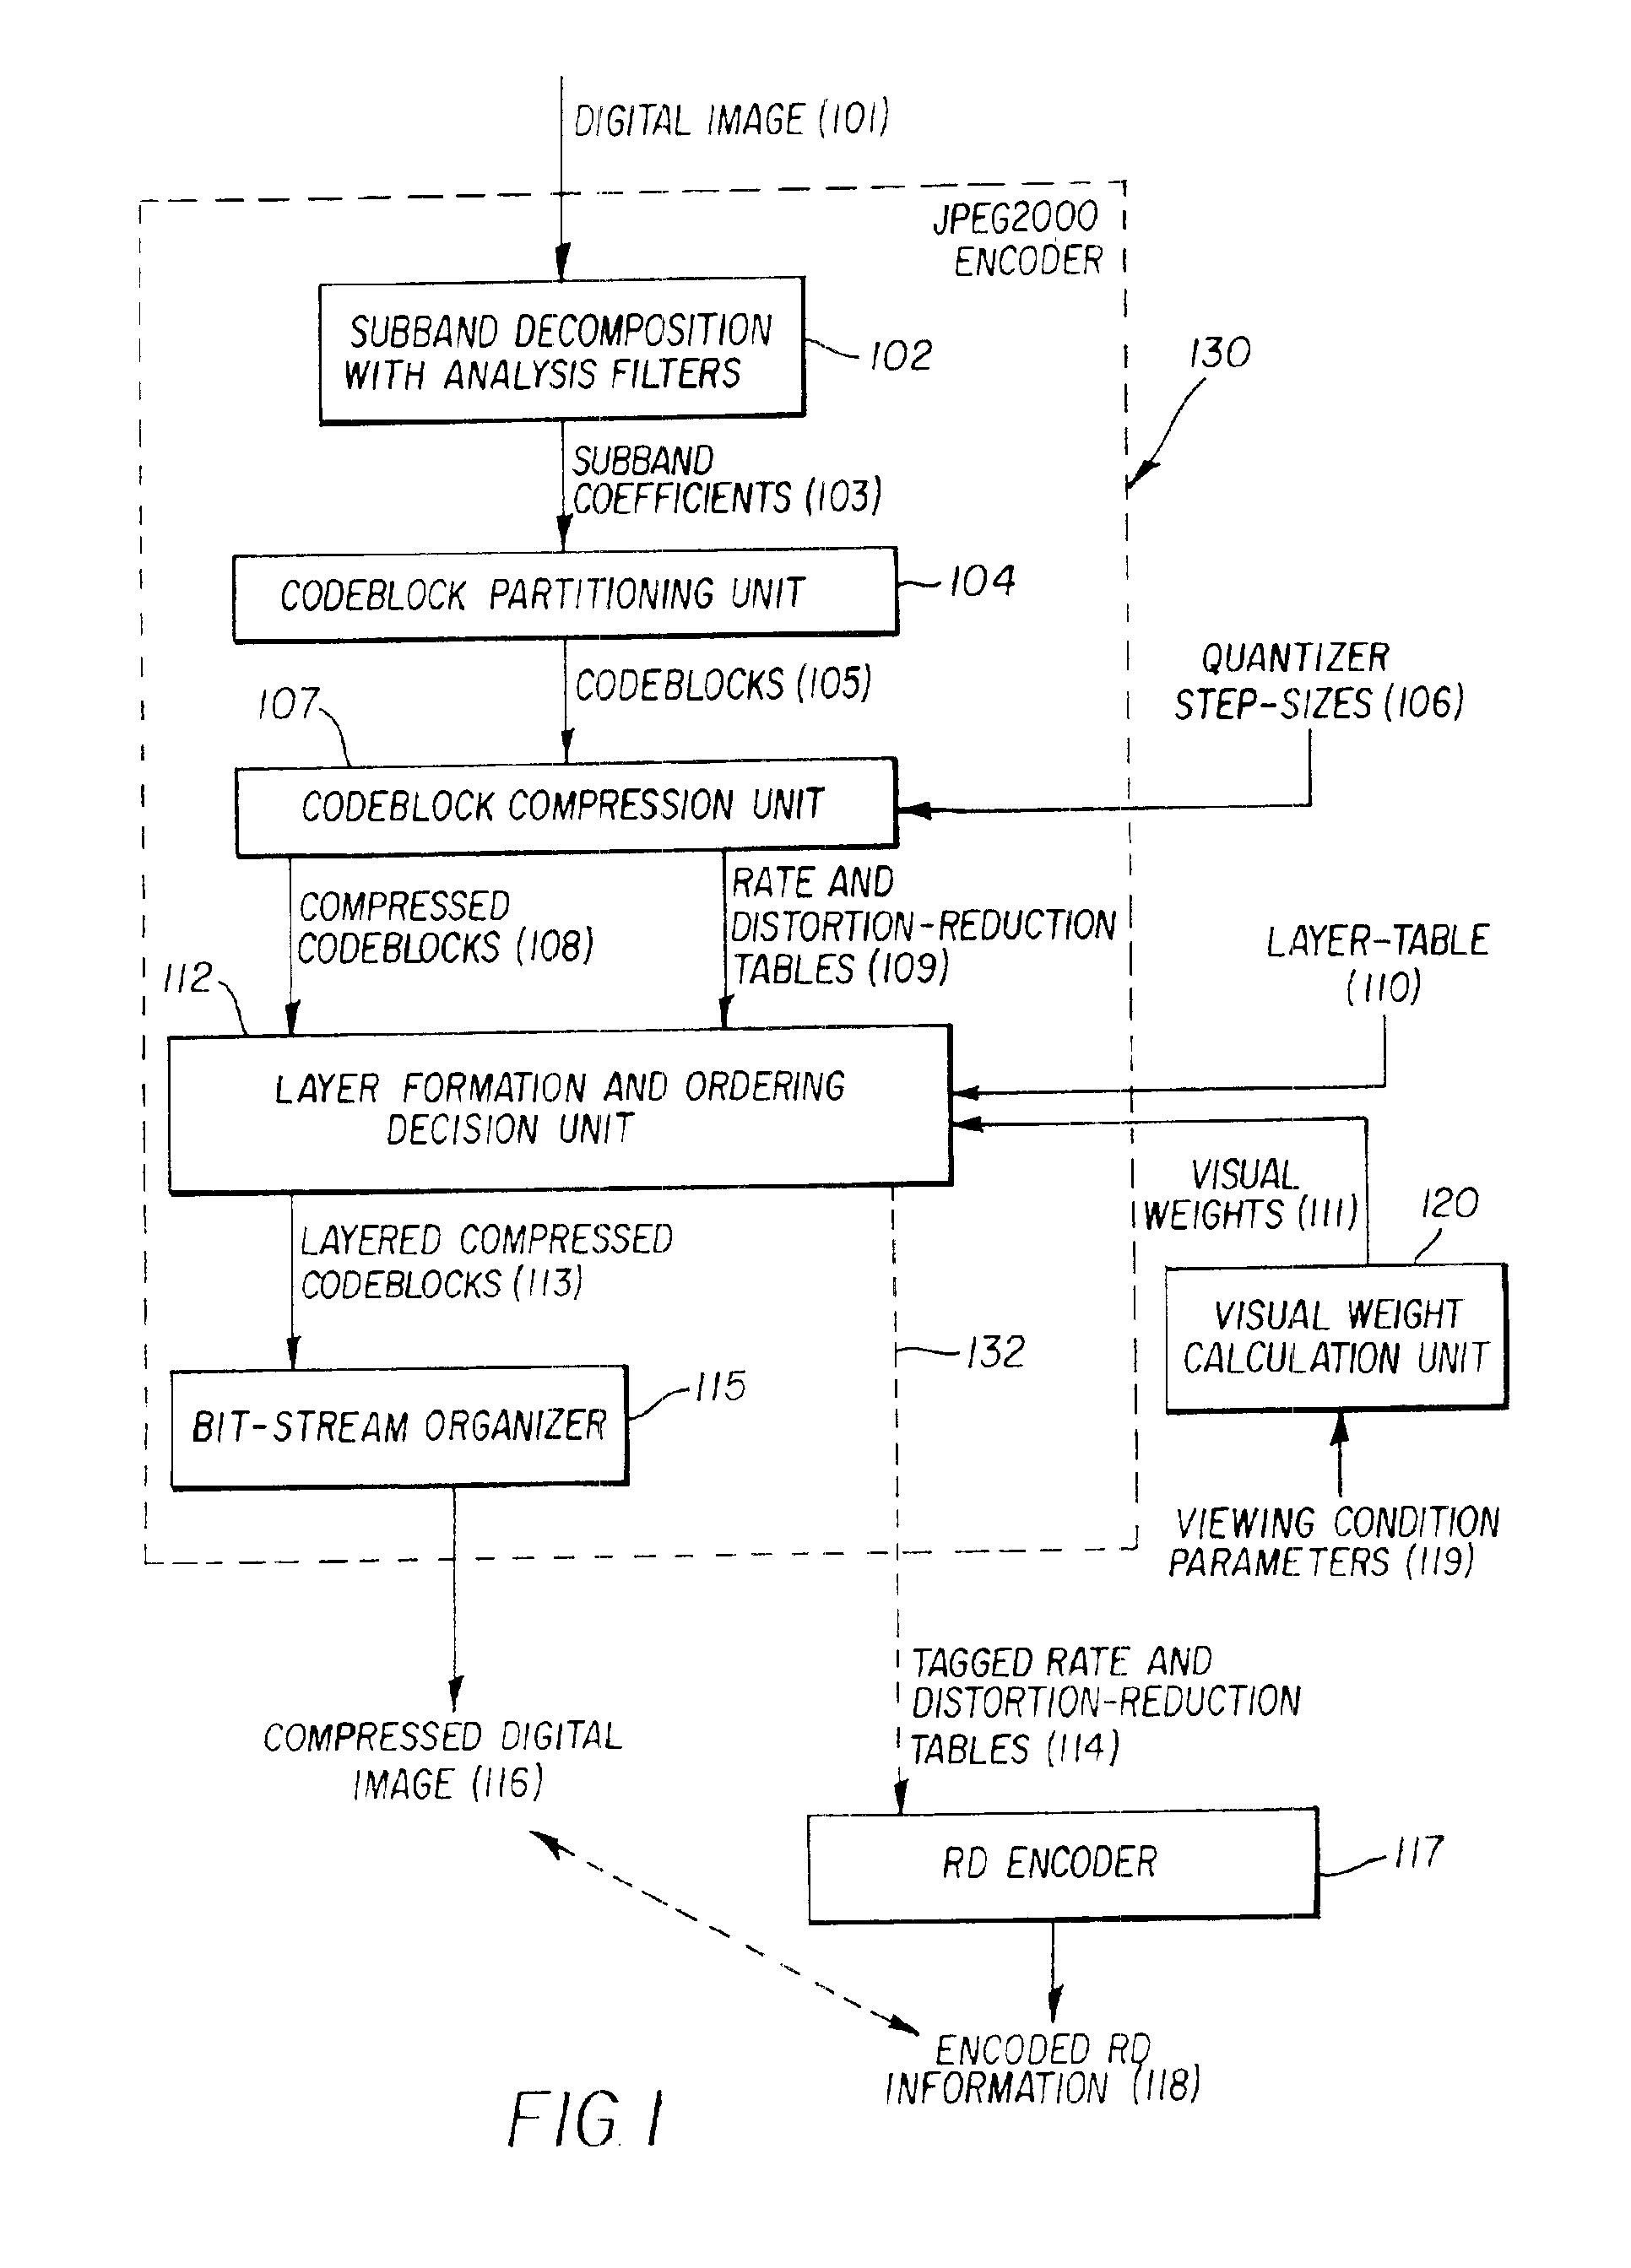 Producing and encoding rate-distortion information allowing optimal transcoding of compressed digital image